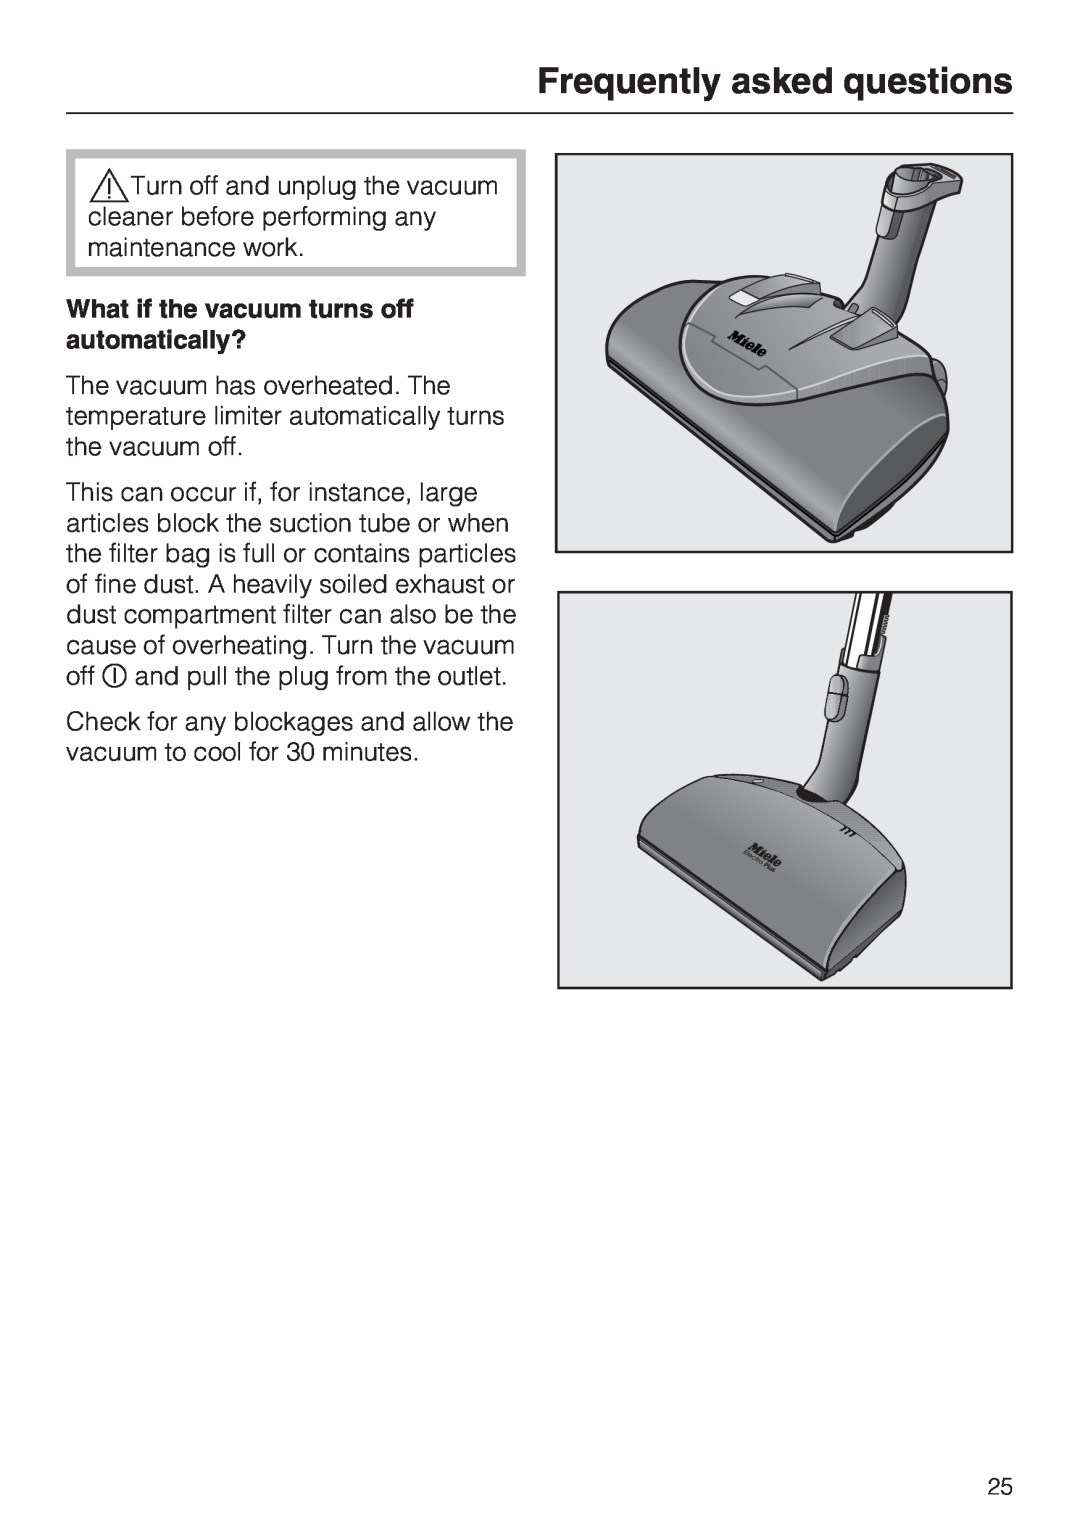 Miele S 2001 manual Frequently asked questions, What if the vacuum turns off automatically? 